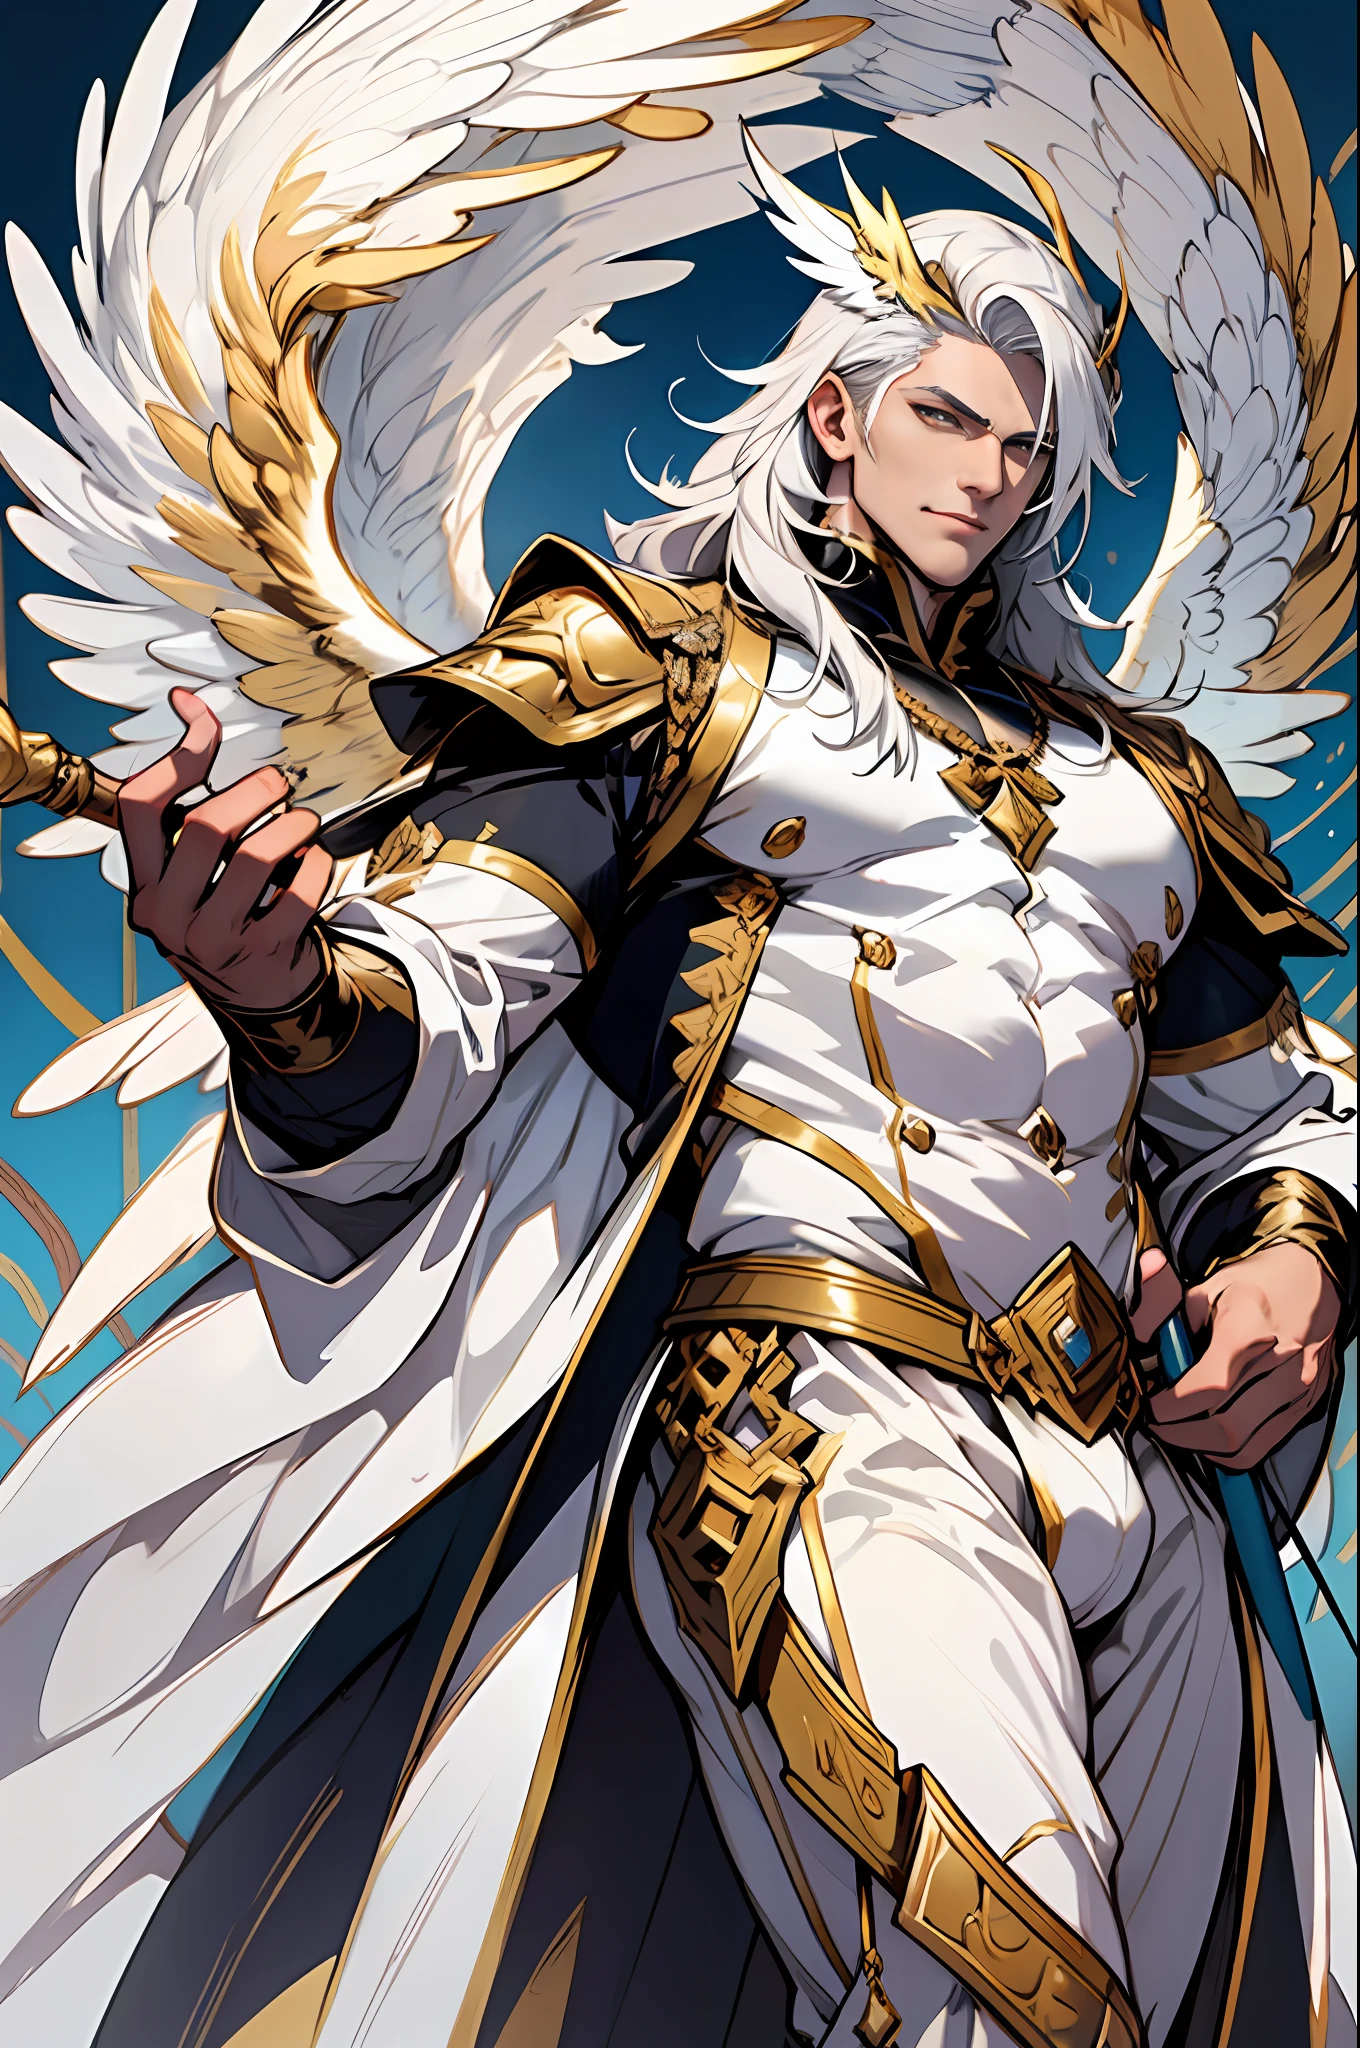 Caius is a handsome male, stands at 7ft tall. He has an athletic body structure. He wears royal attire thats silver and gold. He has beautiful white silky hair and an golden color. He is seen with a staff. He has huge white wings. A big bulge in his pants. White Phoenix human form